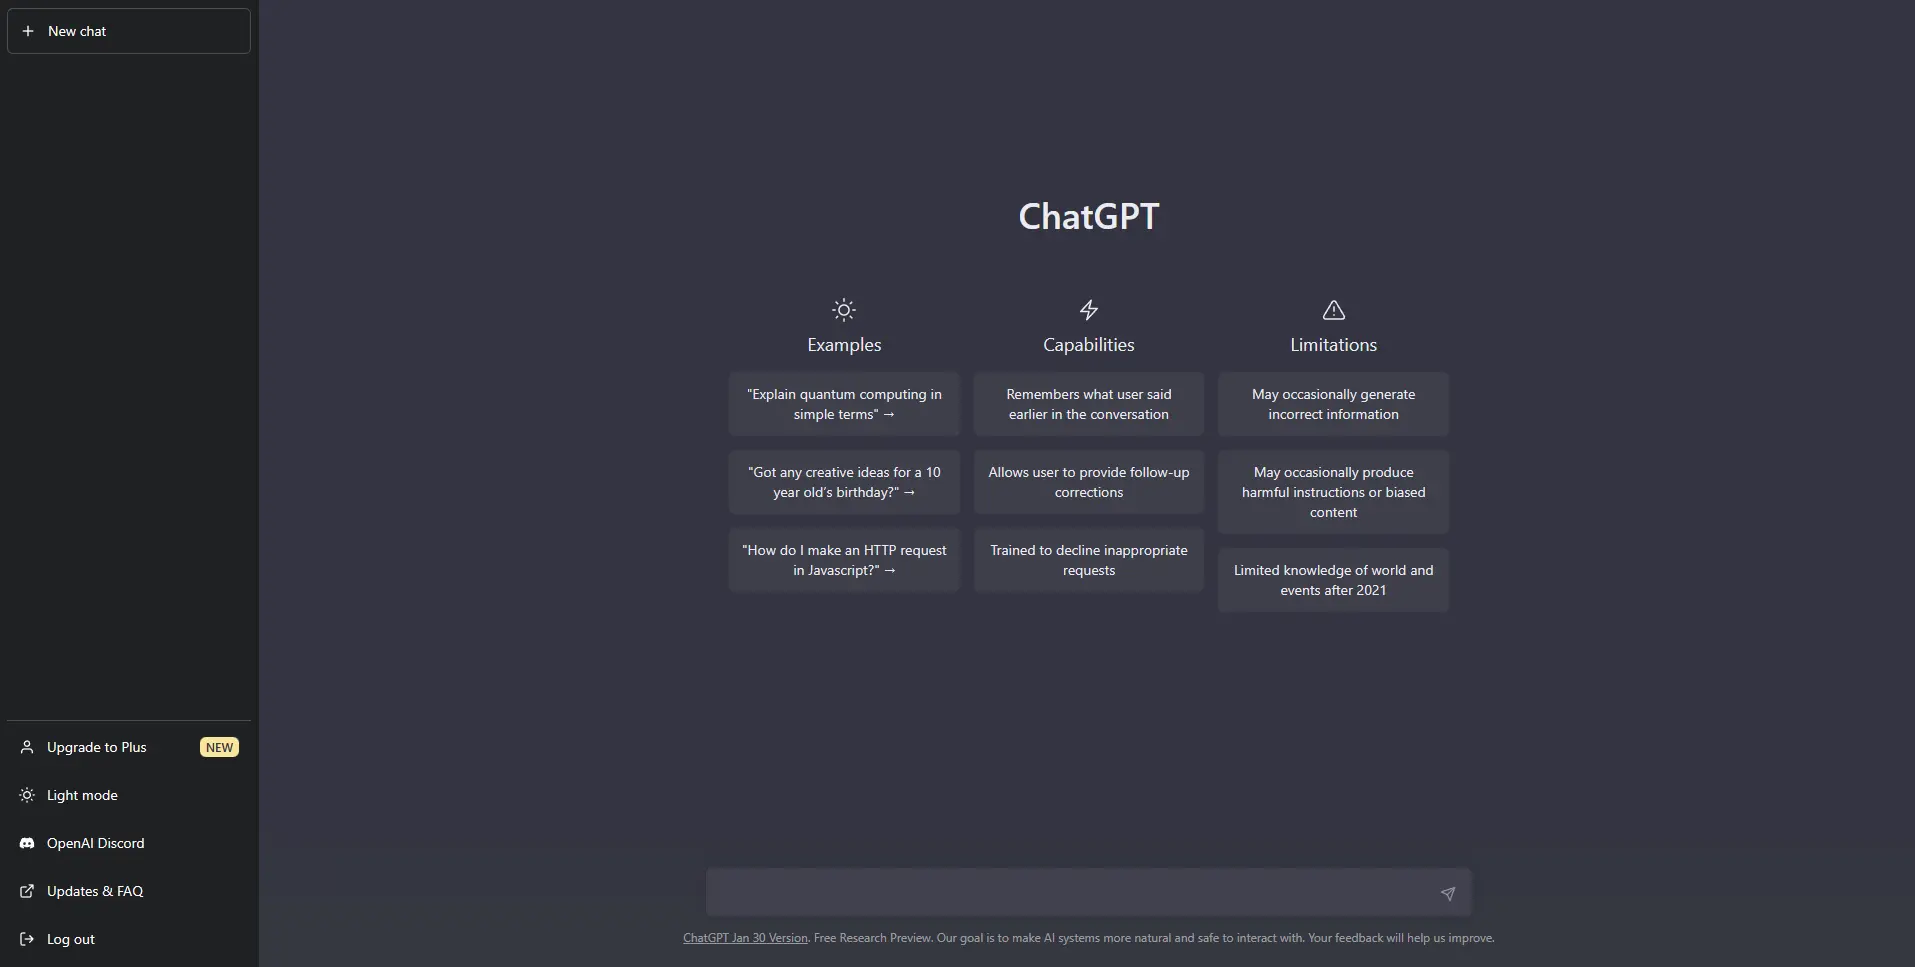 ChatGPT interface with three panels: Examples, capabilities, and limitations